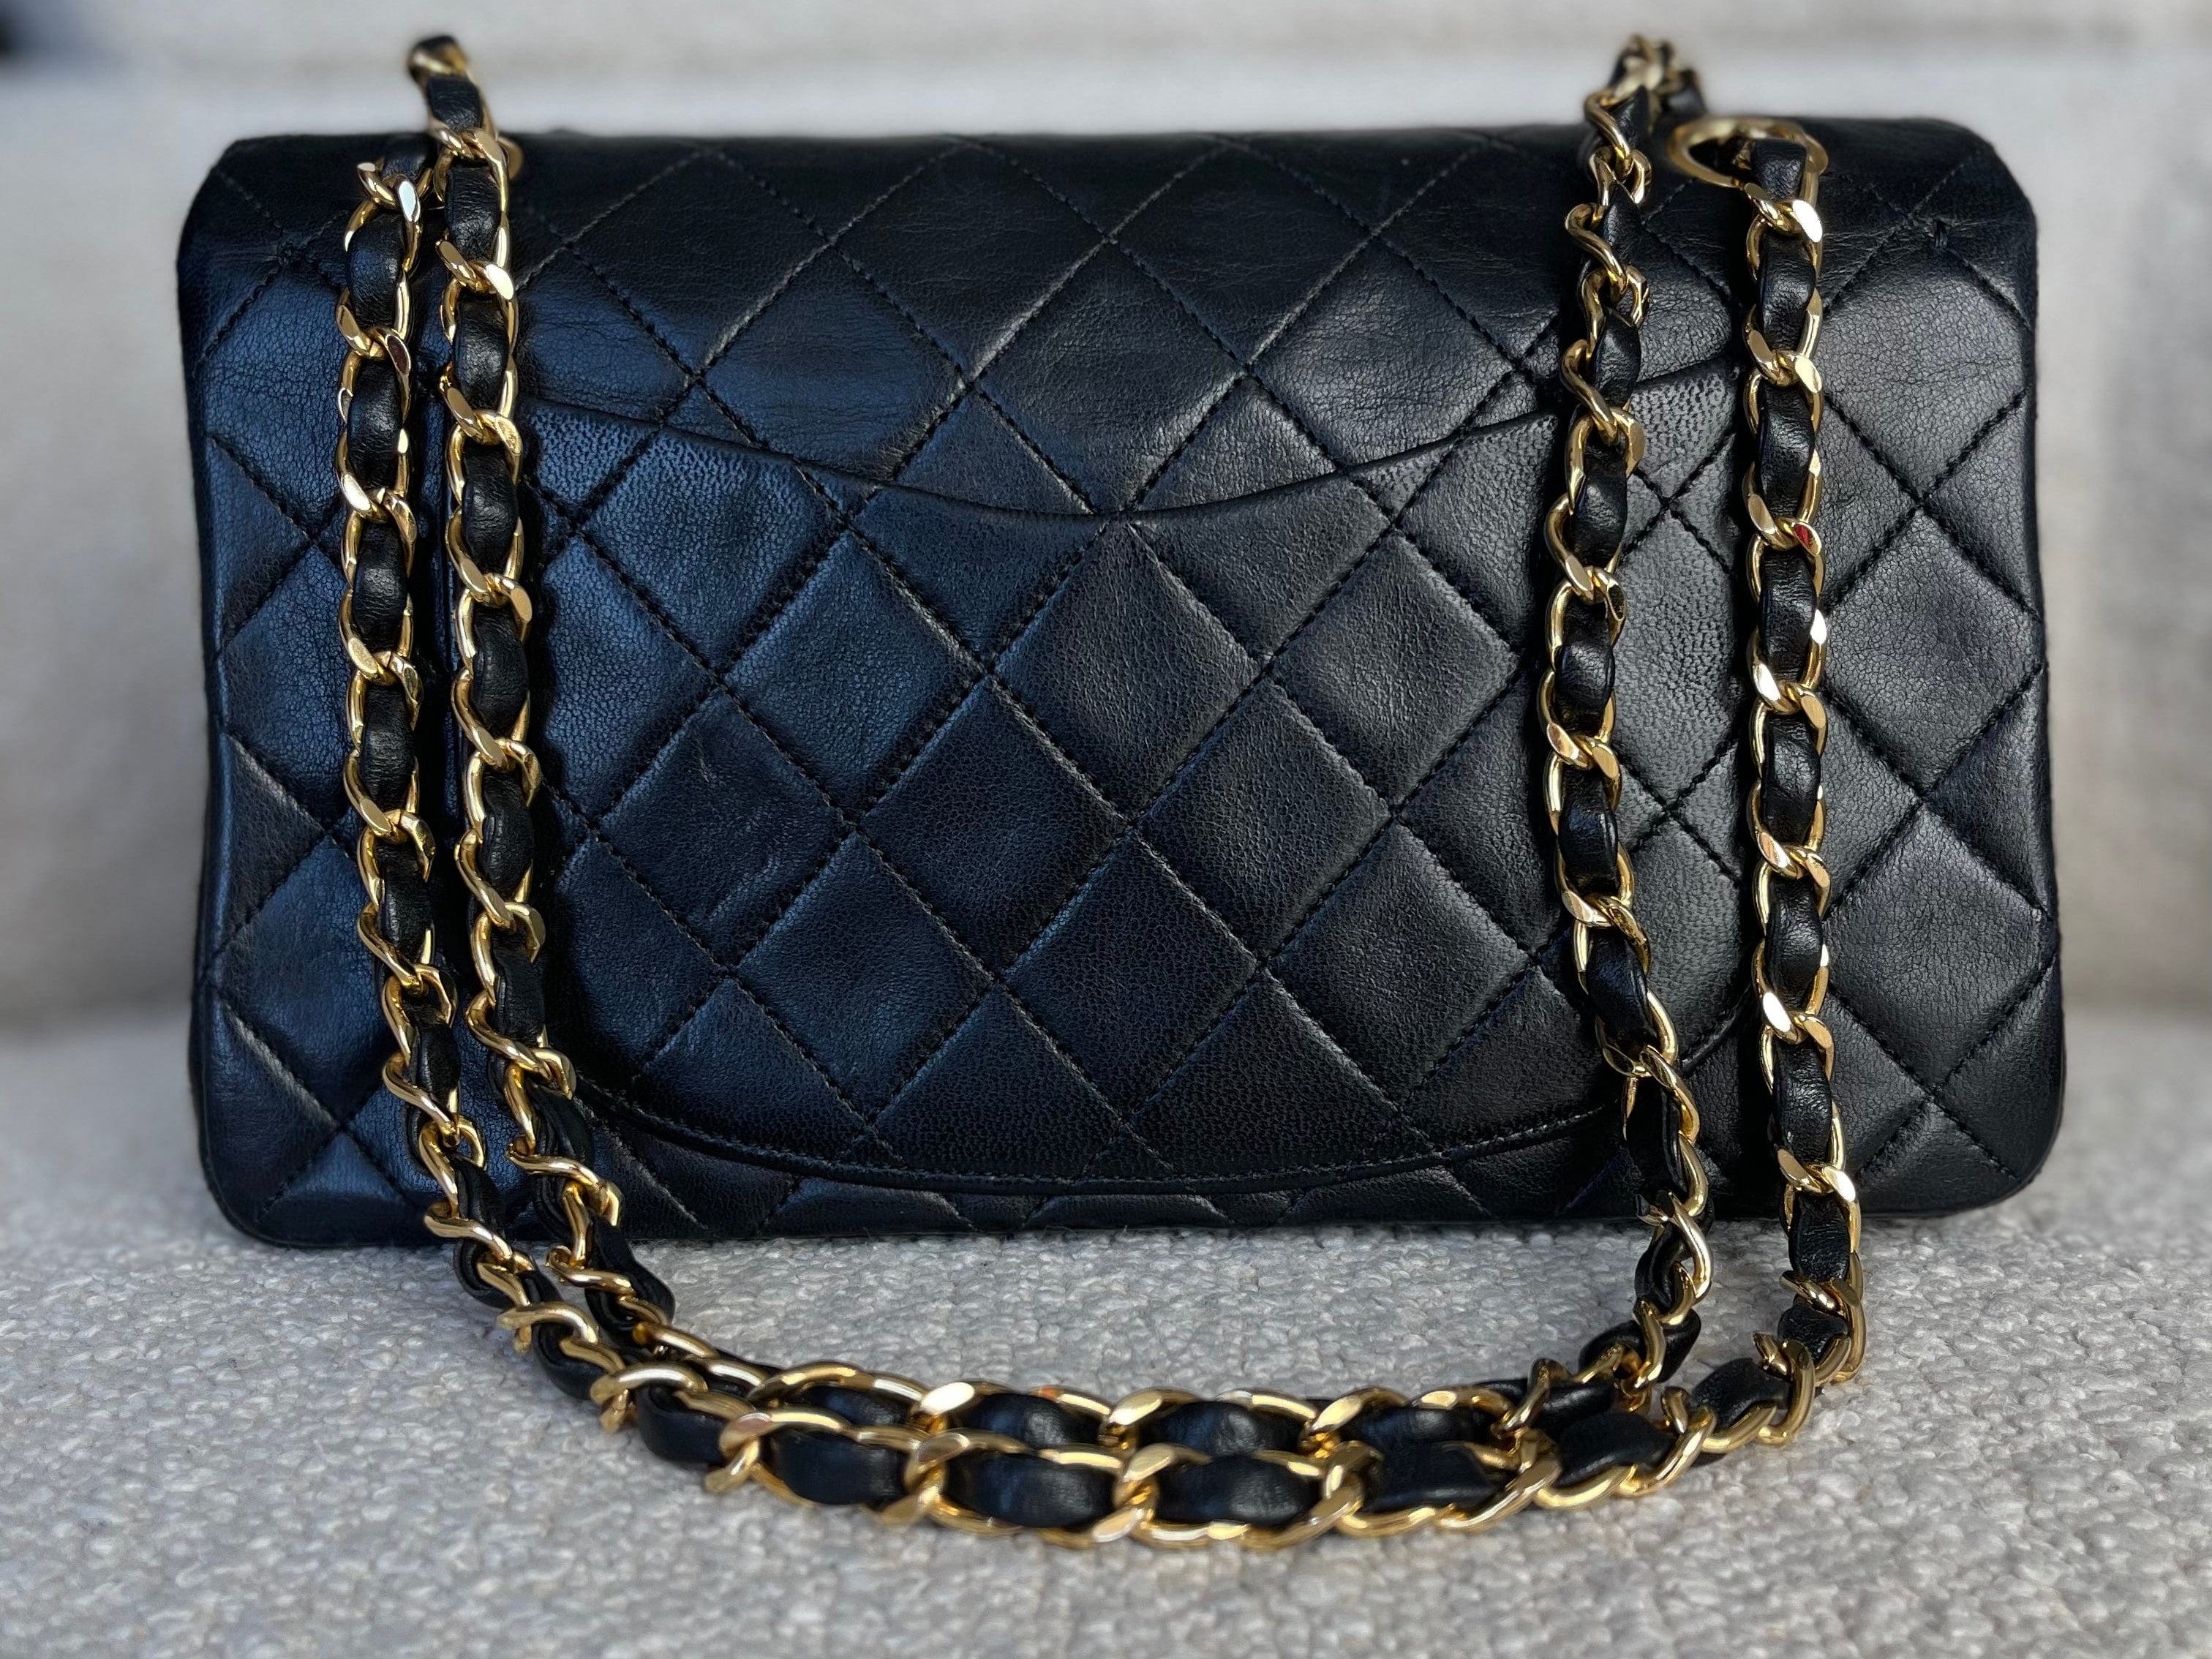 CHANEL Handbag Vintage Black Lambskin Quilted Classic Flap Small GHW - Redeluxe